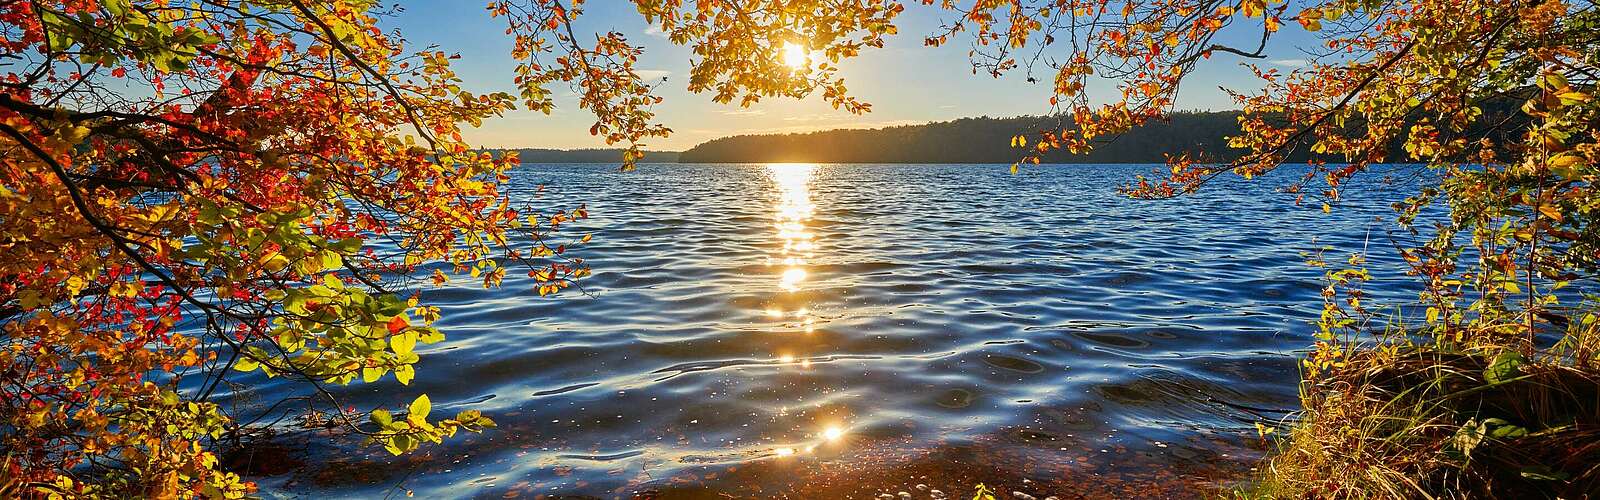 Herbstmoment am Stechlinsee,
        
    

        Foto: TMB-Fotoarchiv/Frank Liebke